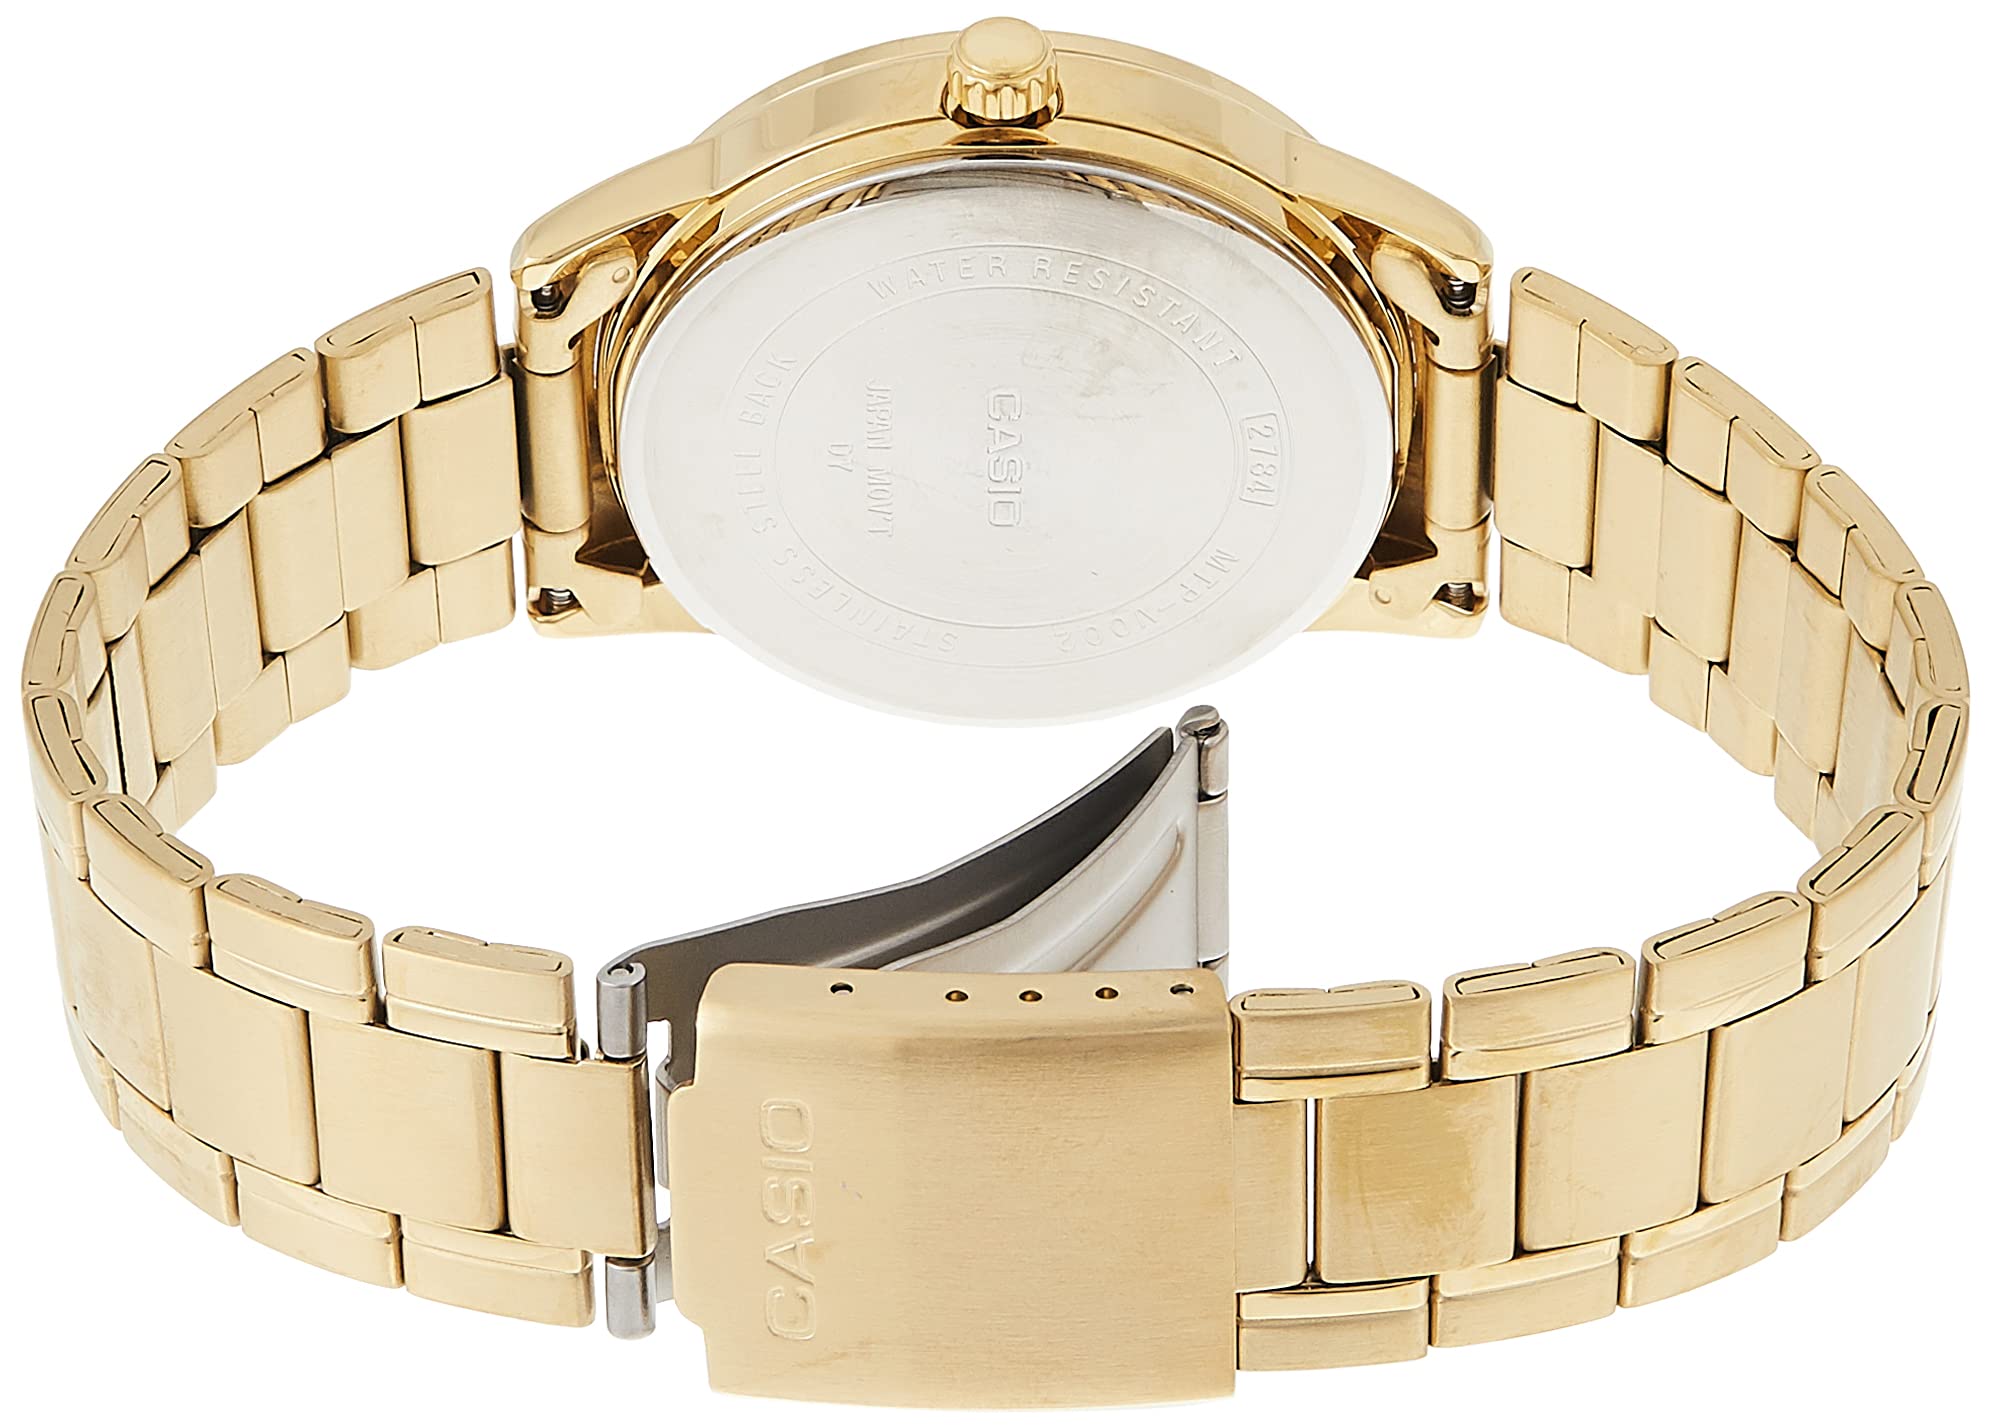 Casio #MTP-V002G-1B Men's Standard Analog Gold Tone Stainless Steel Date Watch